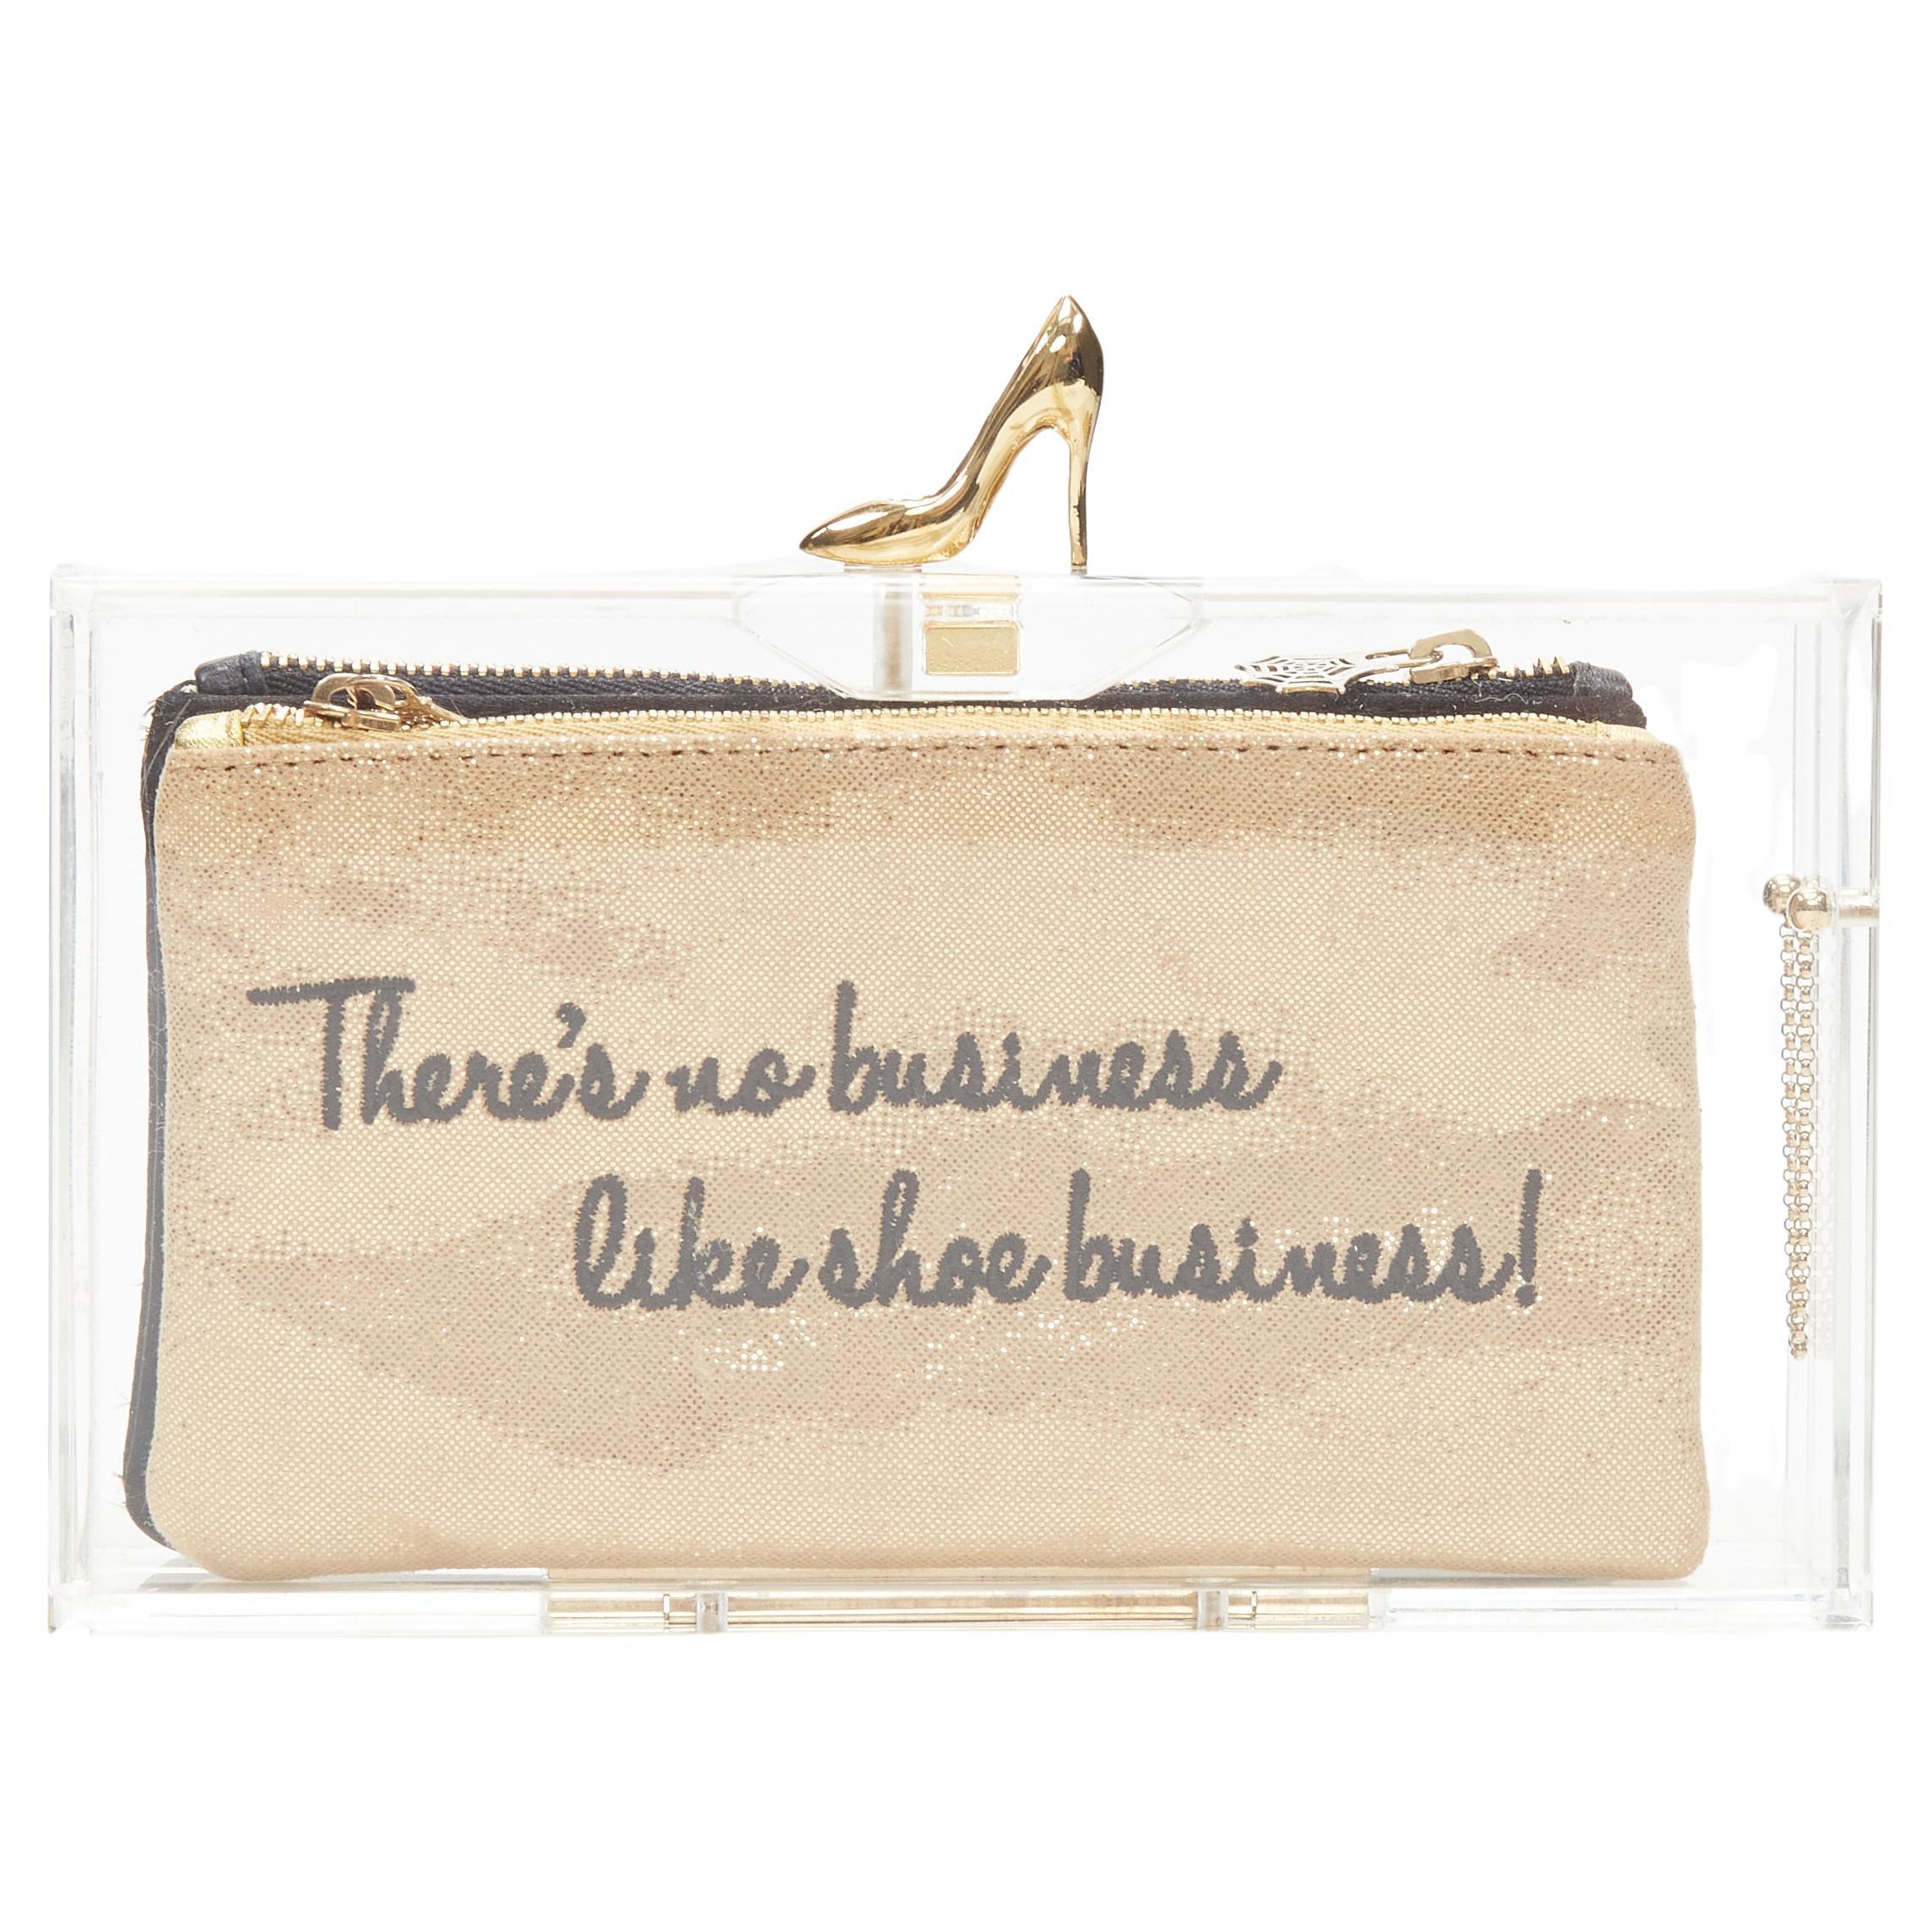 CHARLOTTE OLYMPIA gold shoe embroidery pouch perspex acrylic box clutch bag